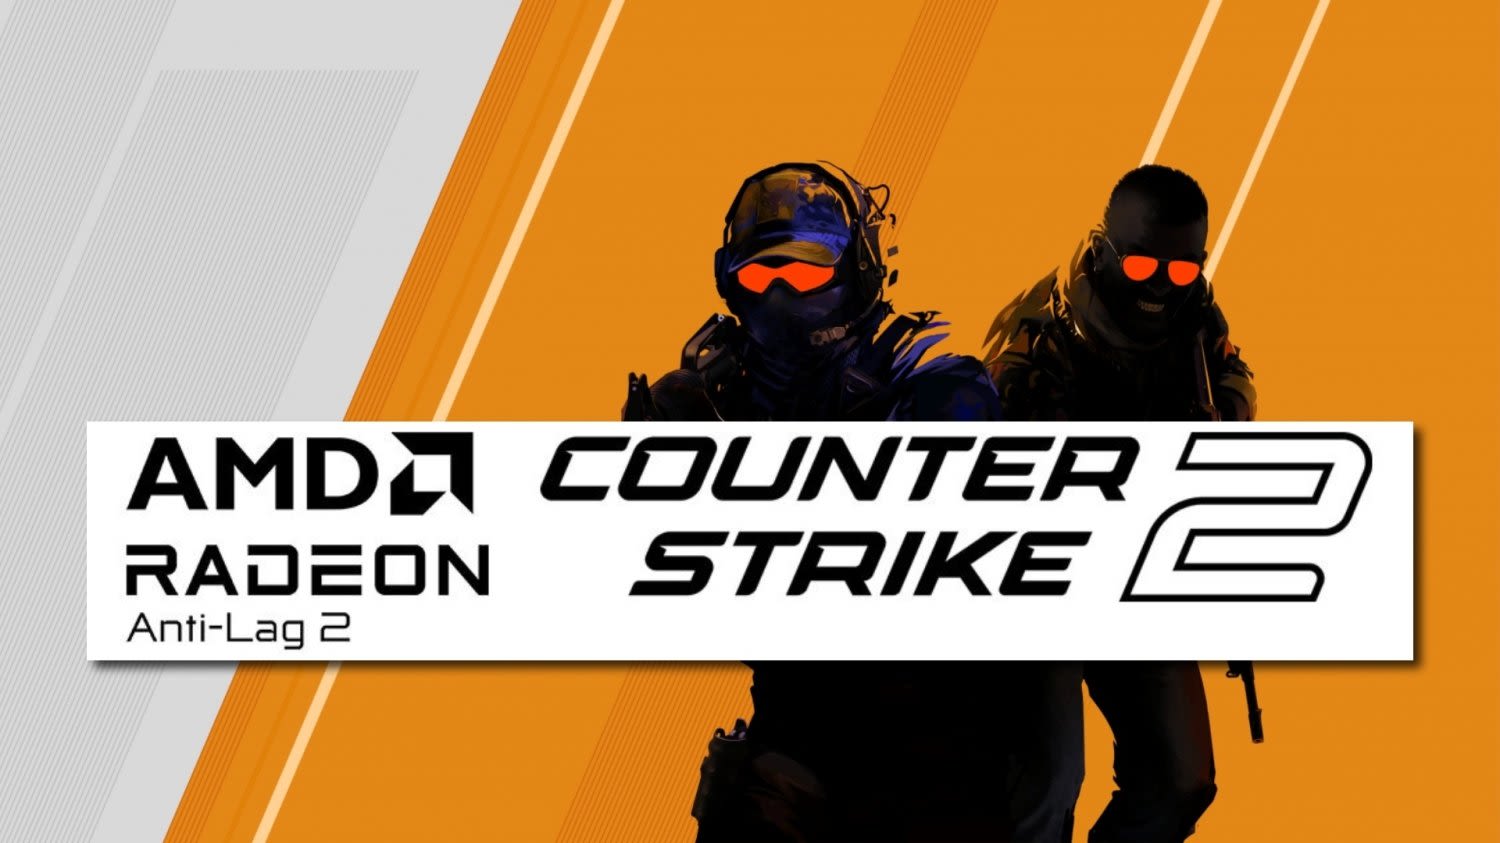 AMD Radeon Anti-Lag 2 is here, requires game integration, available now in Counter-Strike 2